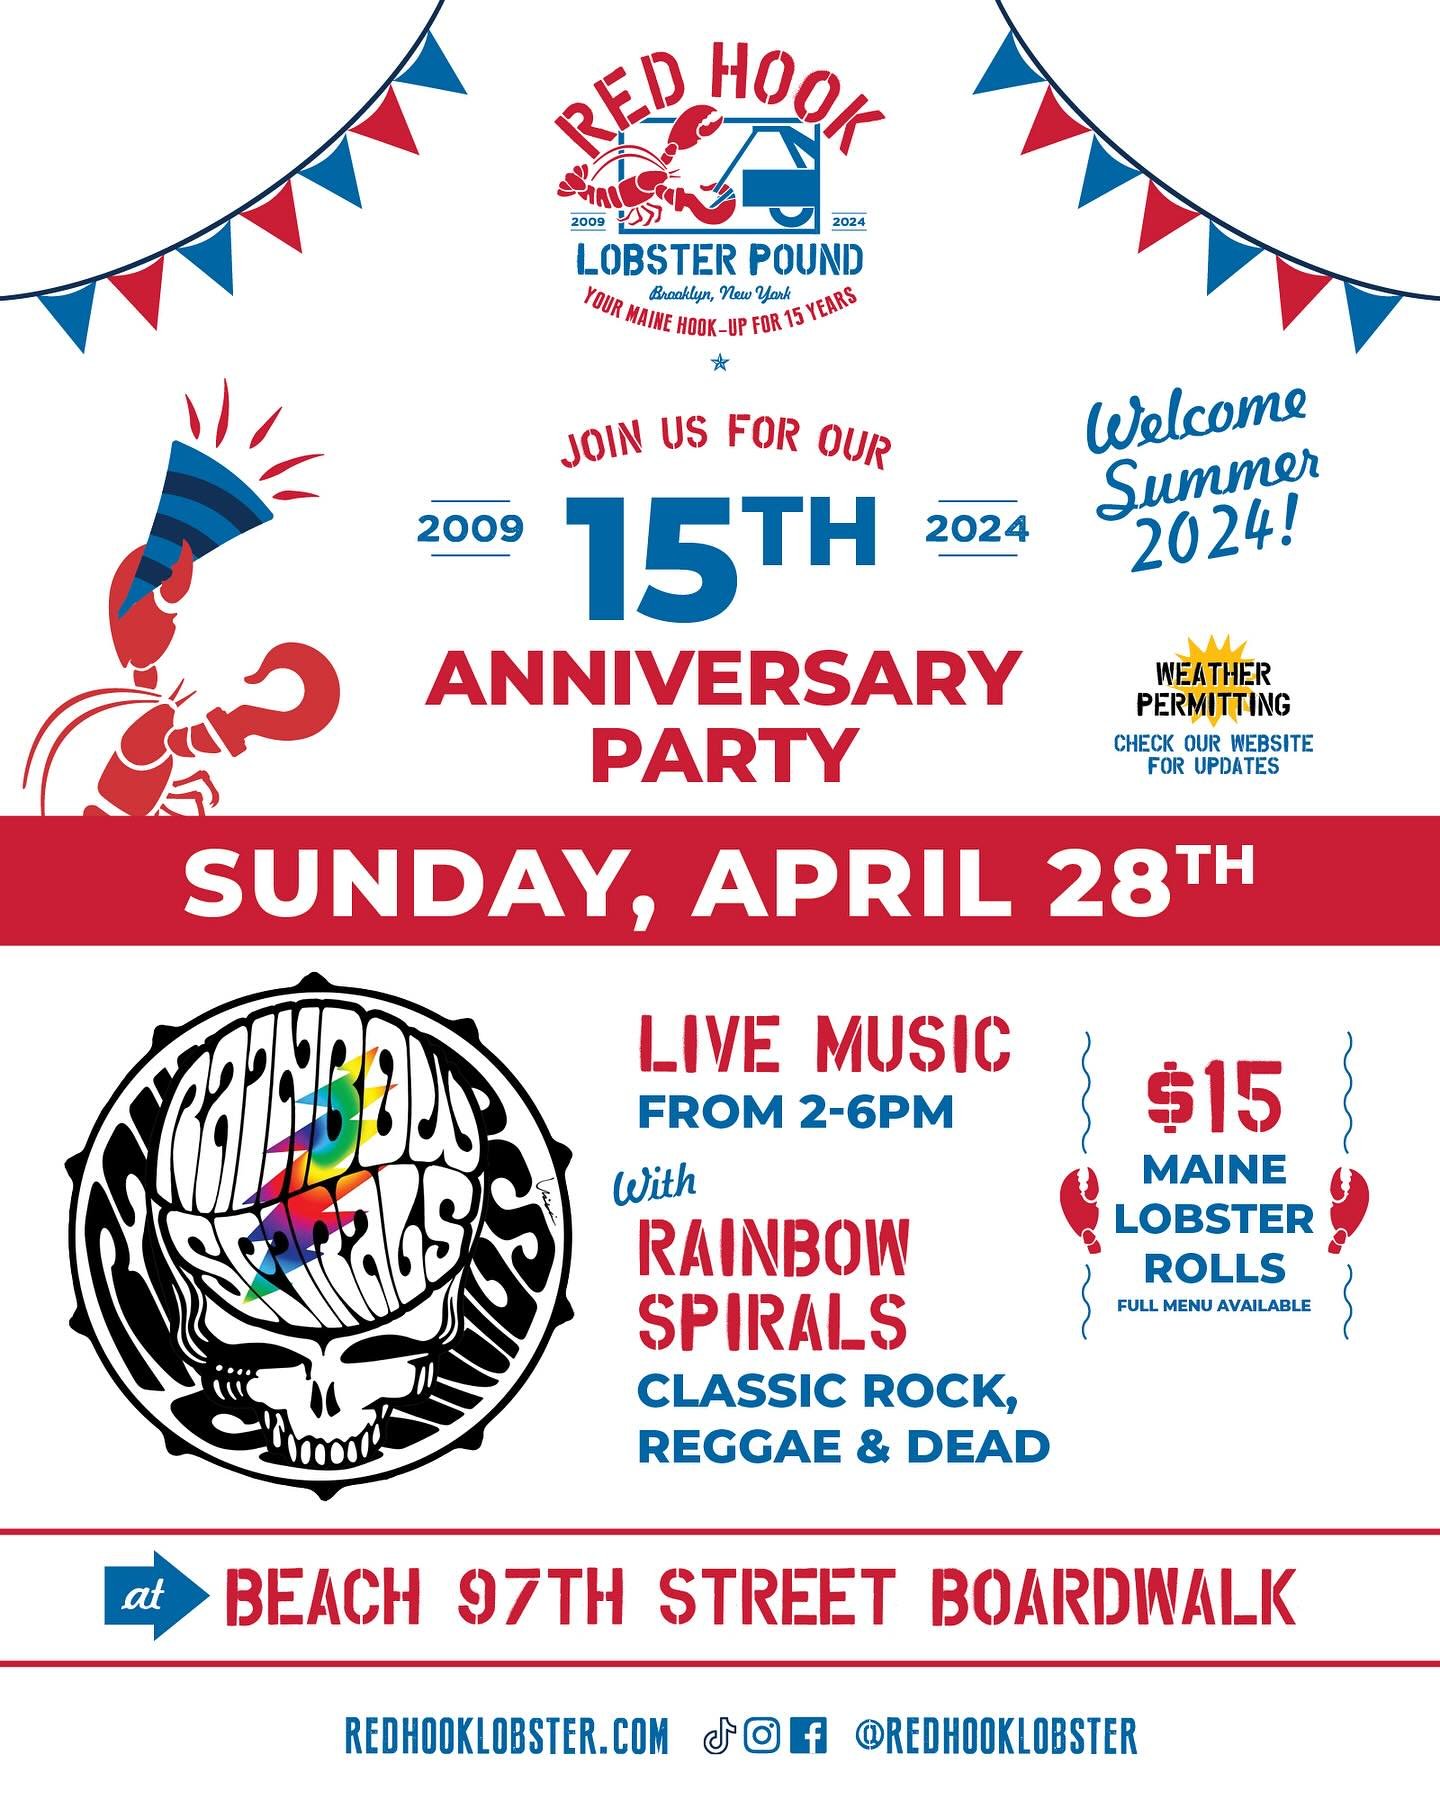 In honor of their 15th year anniversary 🎈Beach 97th is throwing a @redhooklobster bday party for all the seafood lovers out there. This SUNDAY, $15 🦞 rolls, @rainbow_spirals and other prizes. Congrats Susan and co! Weather is looking HOT! 🥵